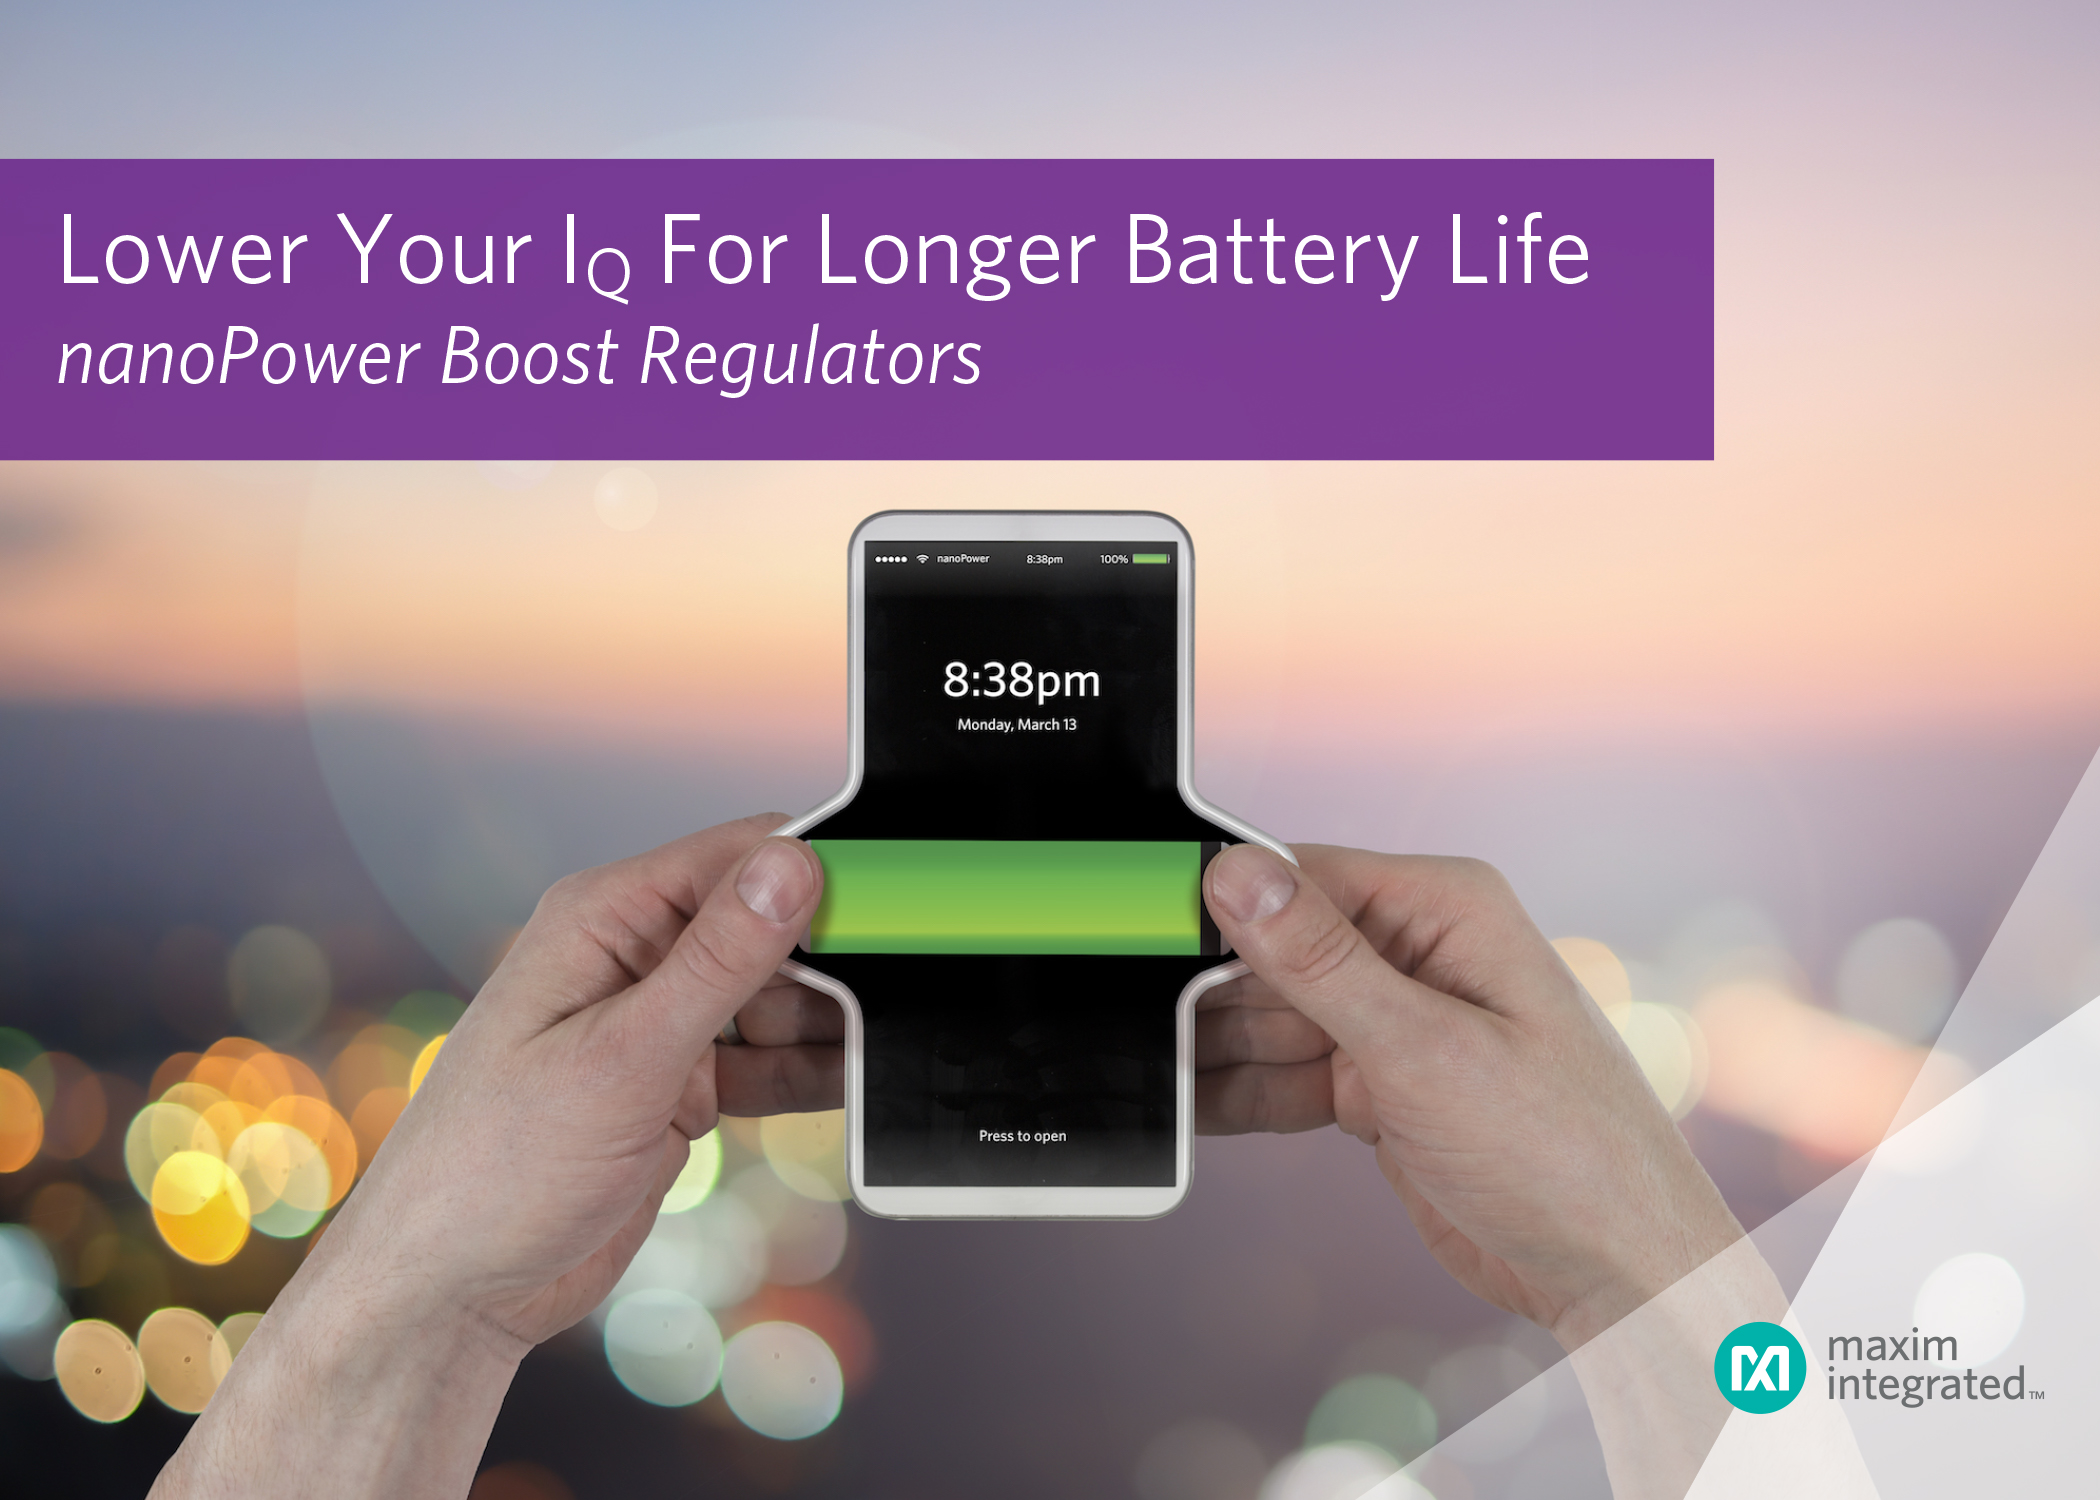 nanoPower Boost Regulator Delivers Industry’s Longest Battery Life and Smallest Solution Size for Wearable and Consumer IoT Designs